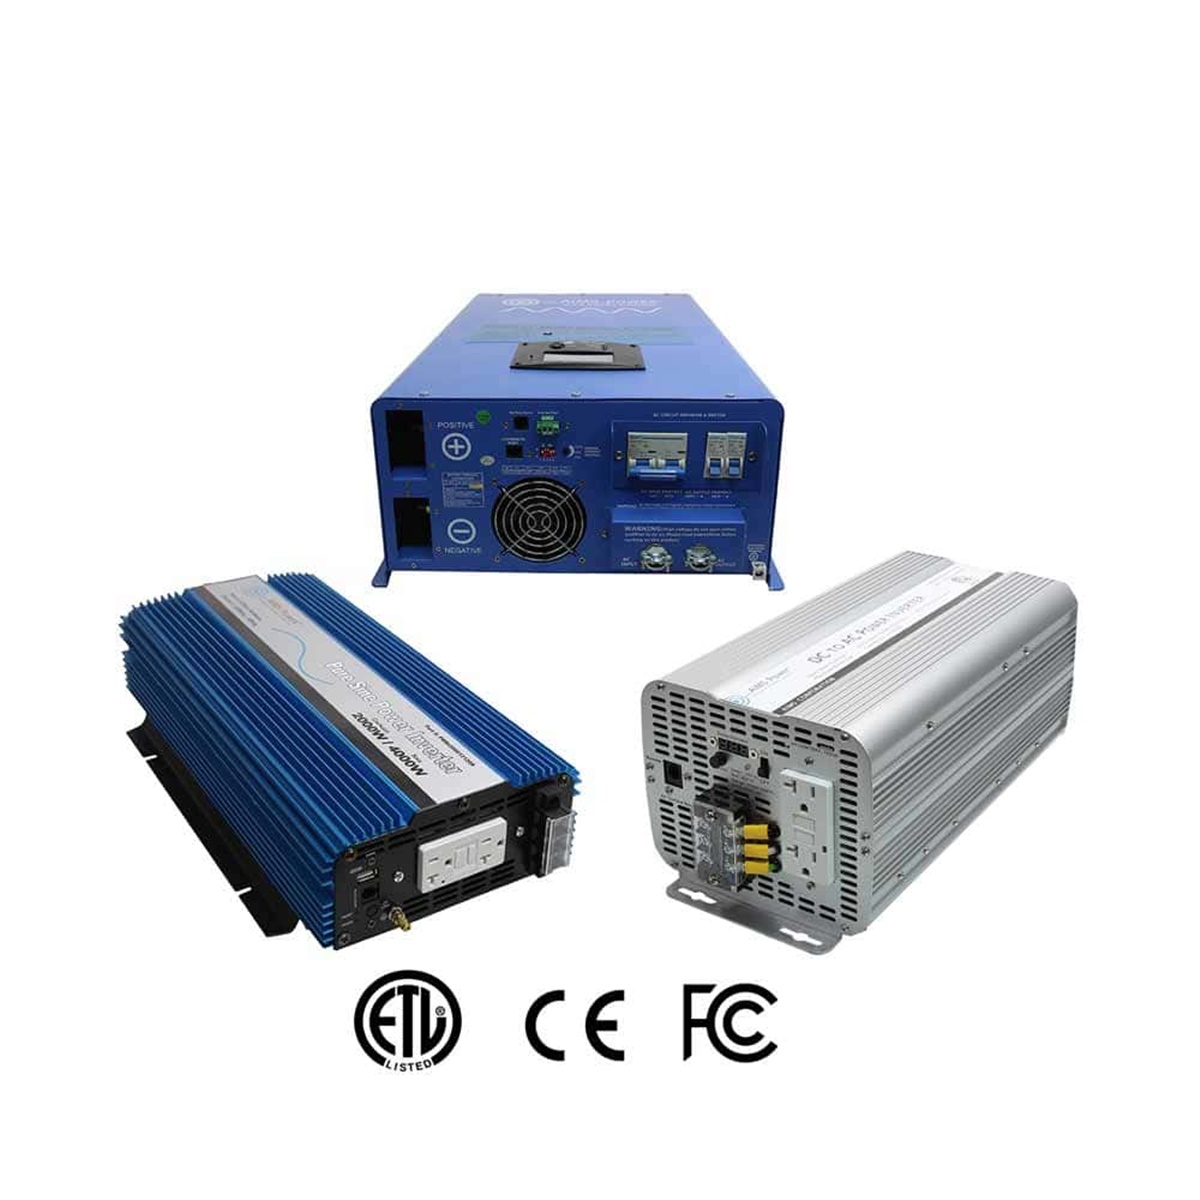 find-the-right-inverter-size-how-big-an-inverter-do-you-need